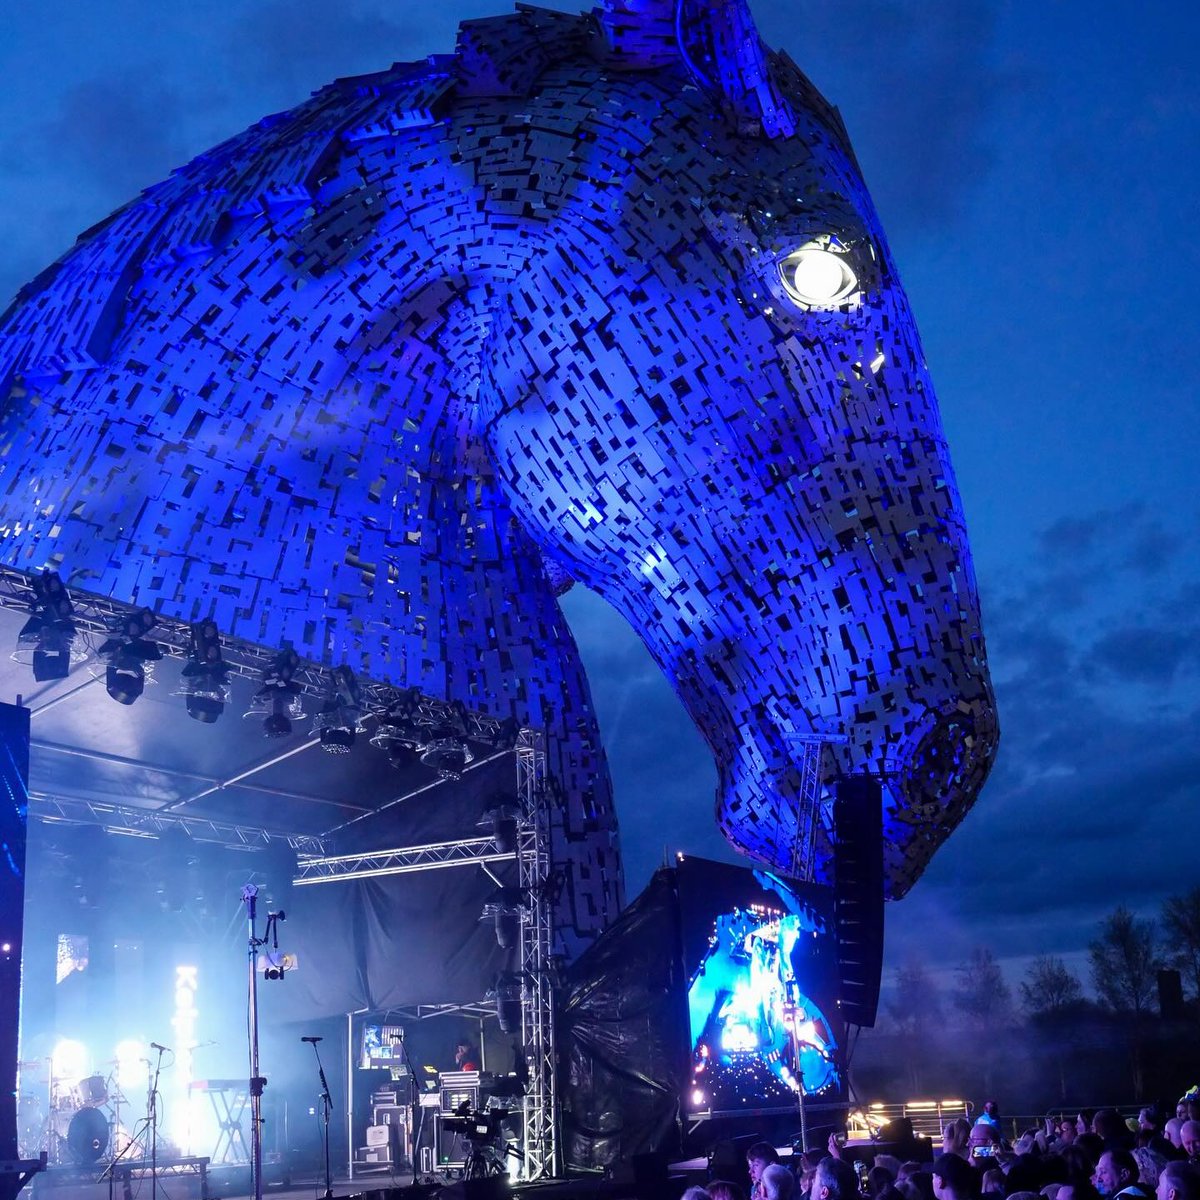 The Kelpies celebrated their 10th anniversary last week! Enjoy these fantastic photos from the event. 📷 thekiltedphoto, iangblack